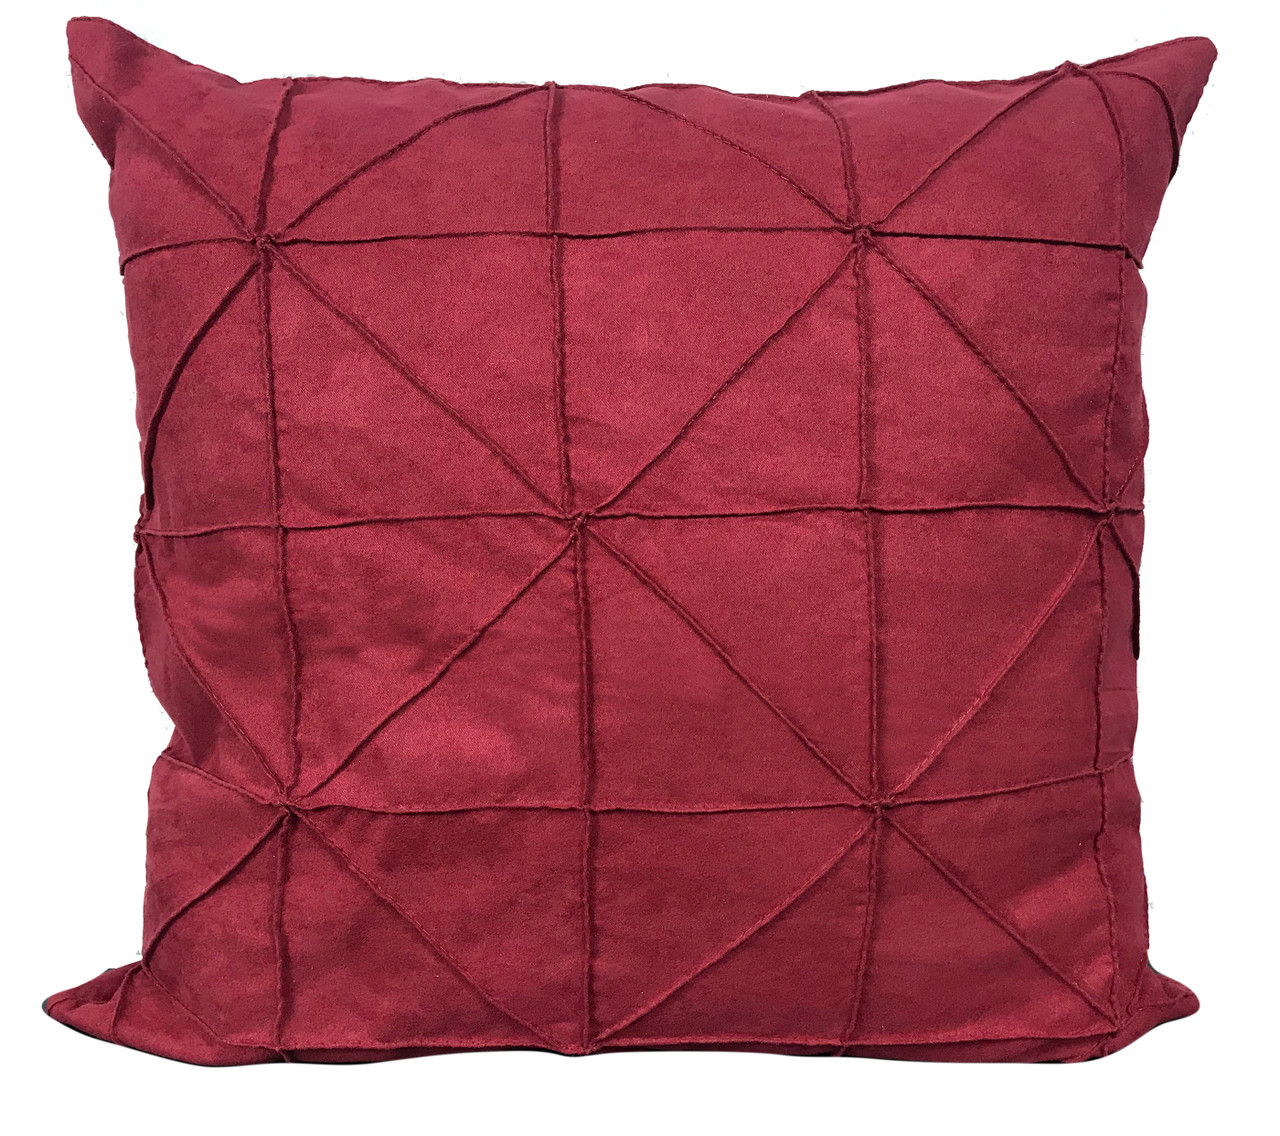 Cushion Cover or Cushion pleat stitched faux suede 17"x17" or 17"x 12" WINE RED